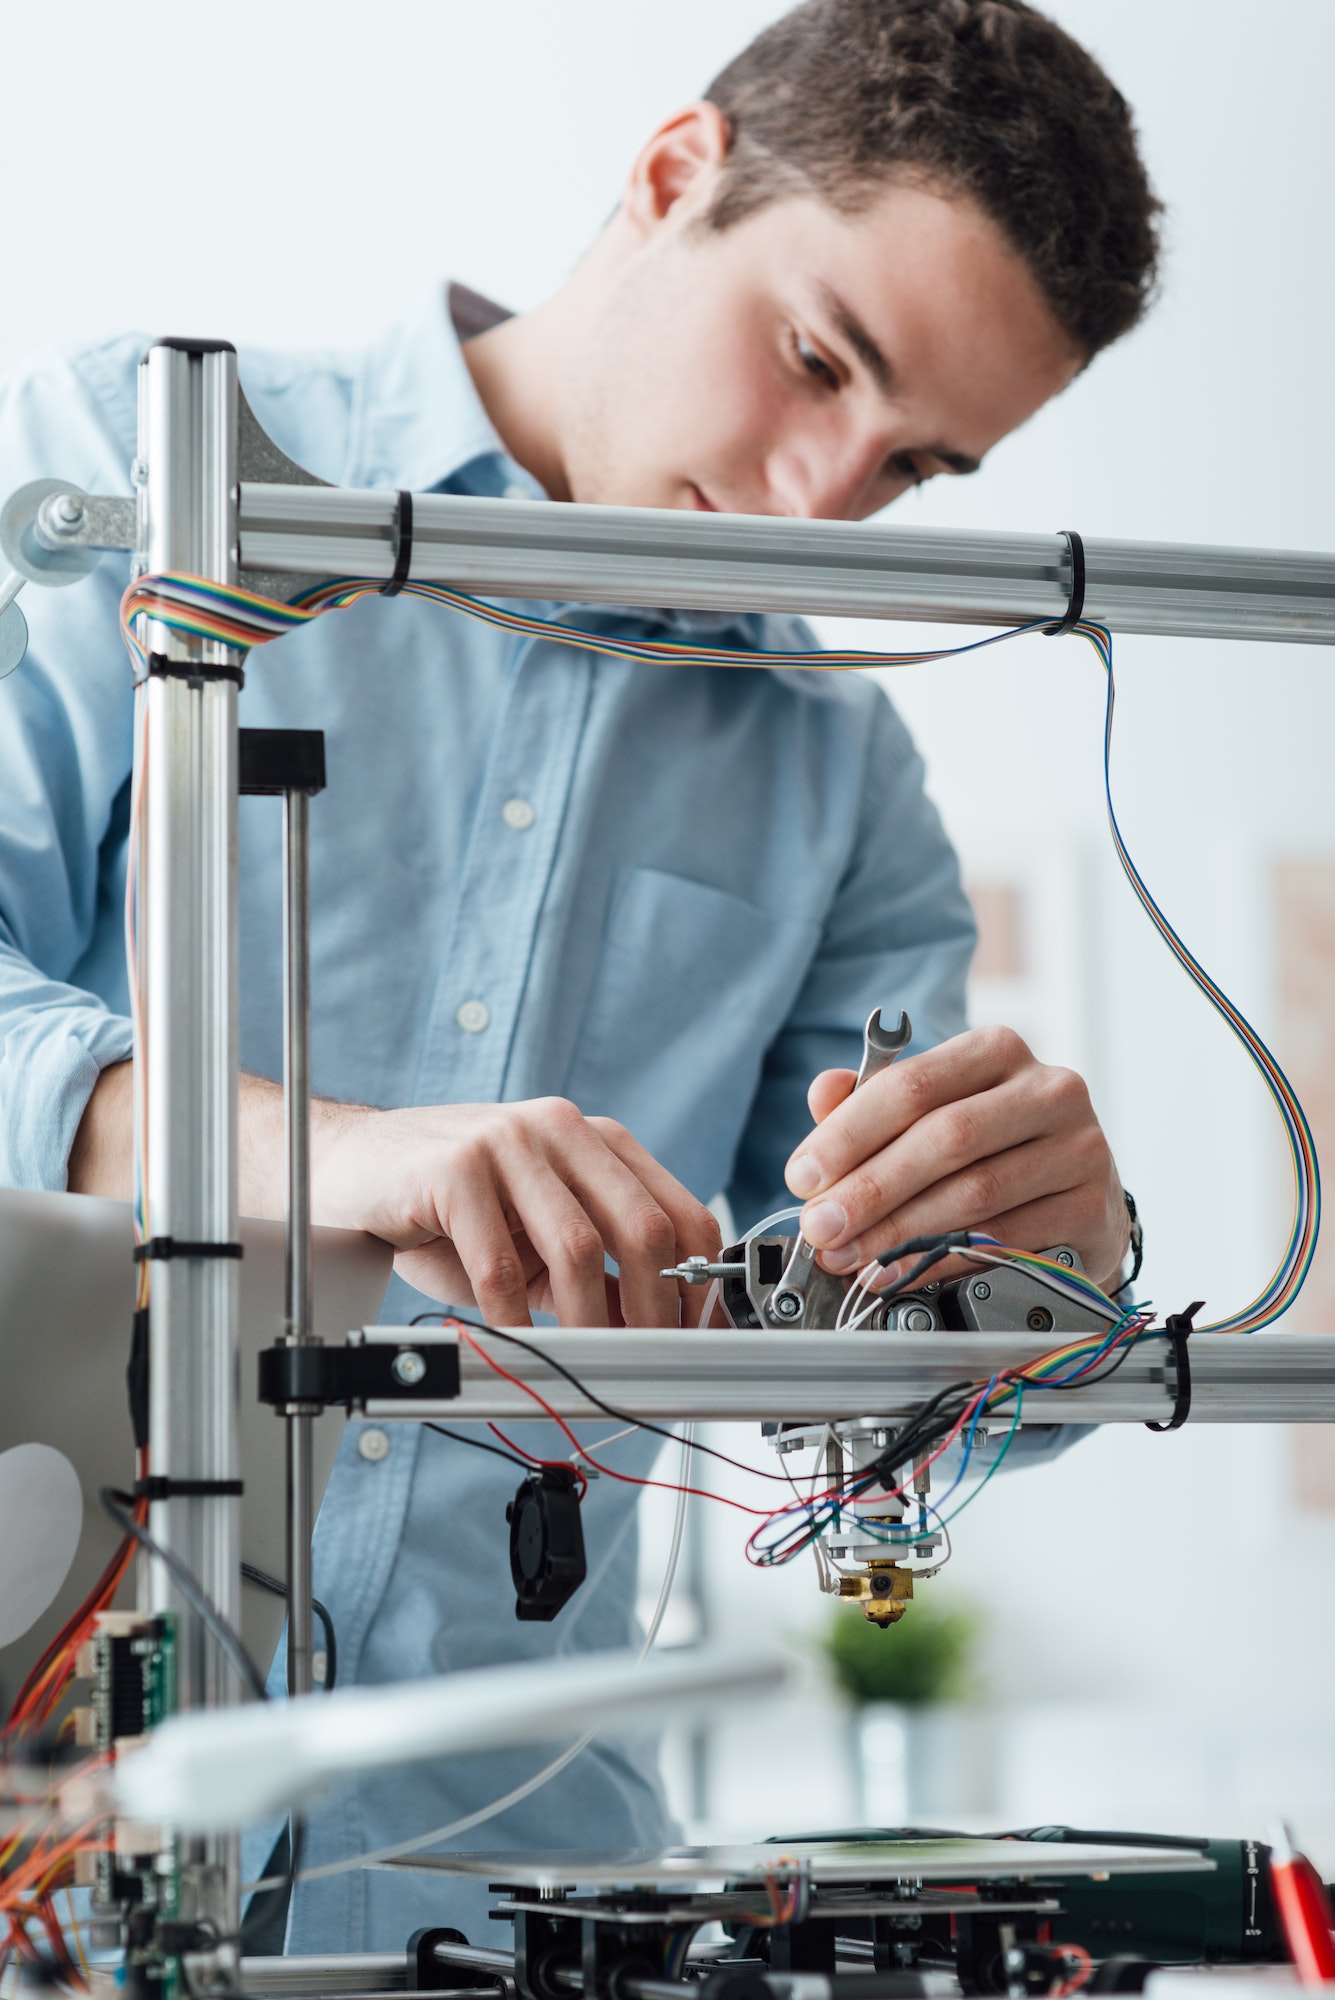 Engineer working on a 3D printer